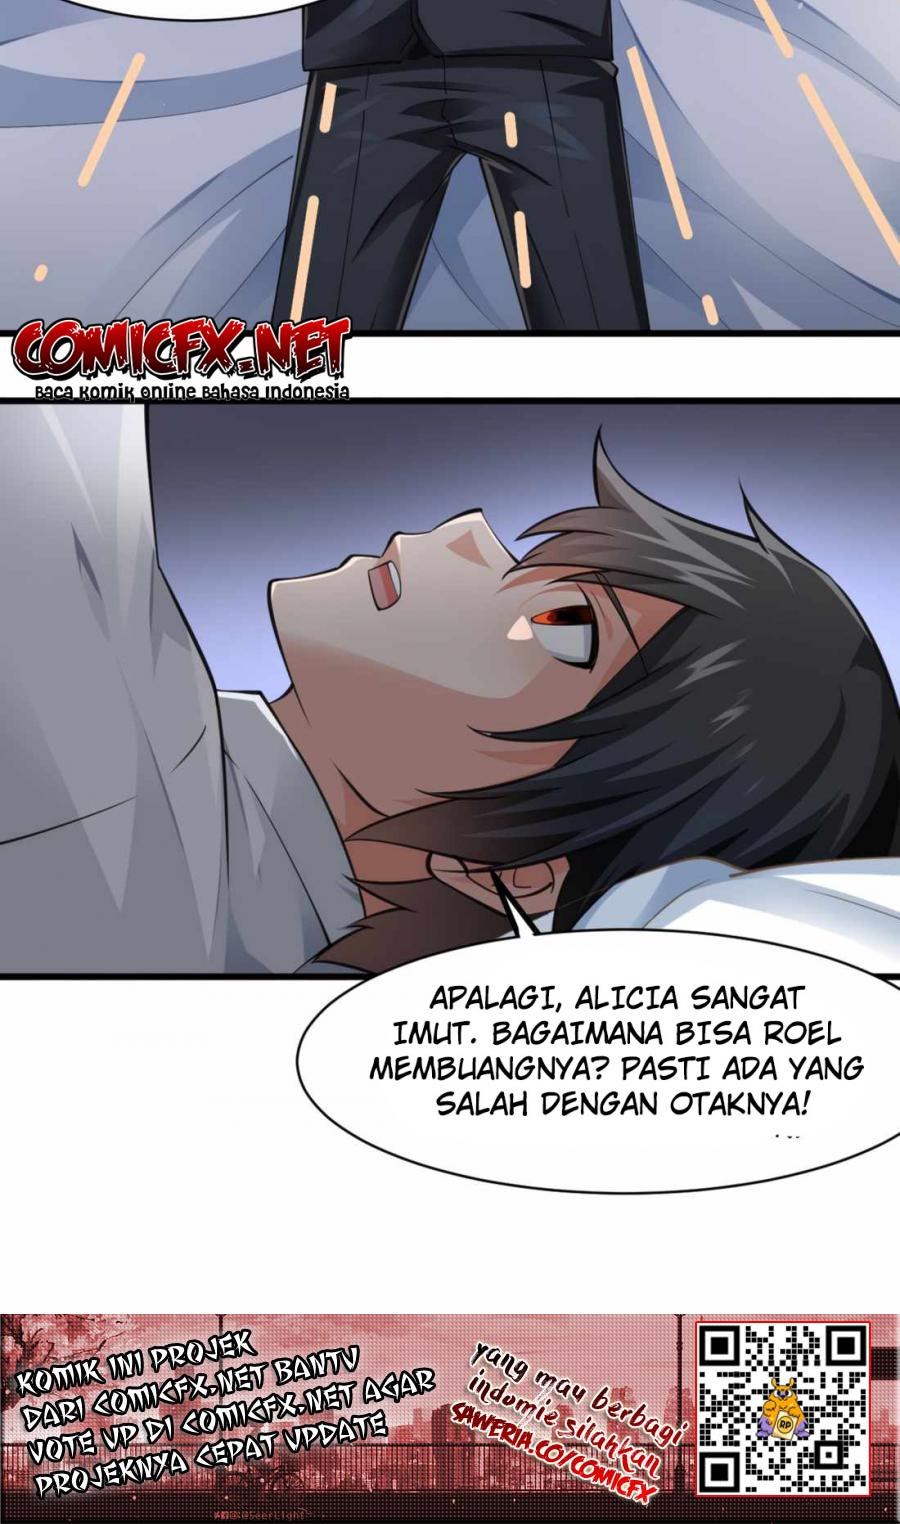 Dilarang COPAS - situs resmi www.mangacanblog.com - Komik little tyrant doesnt want to meet with a bad end 002 - chapter 2 3 Indonesia little tyrant doesnt want to meet with a bad end 002 - chapter 2 Terbaru 20|Baca Manga Komik Indonesia|Mangacan